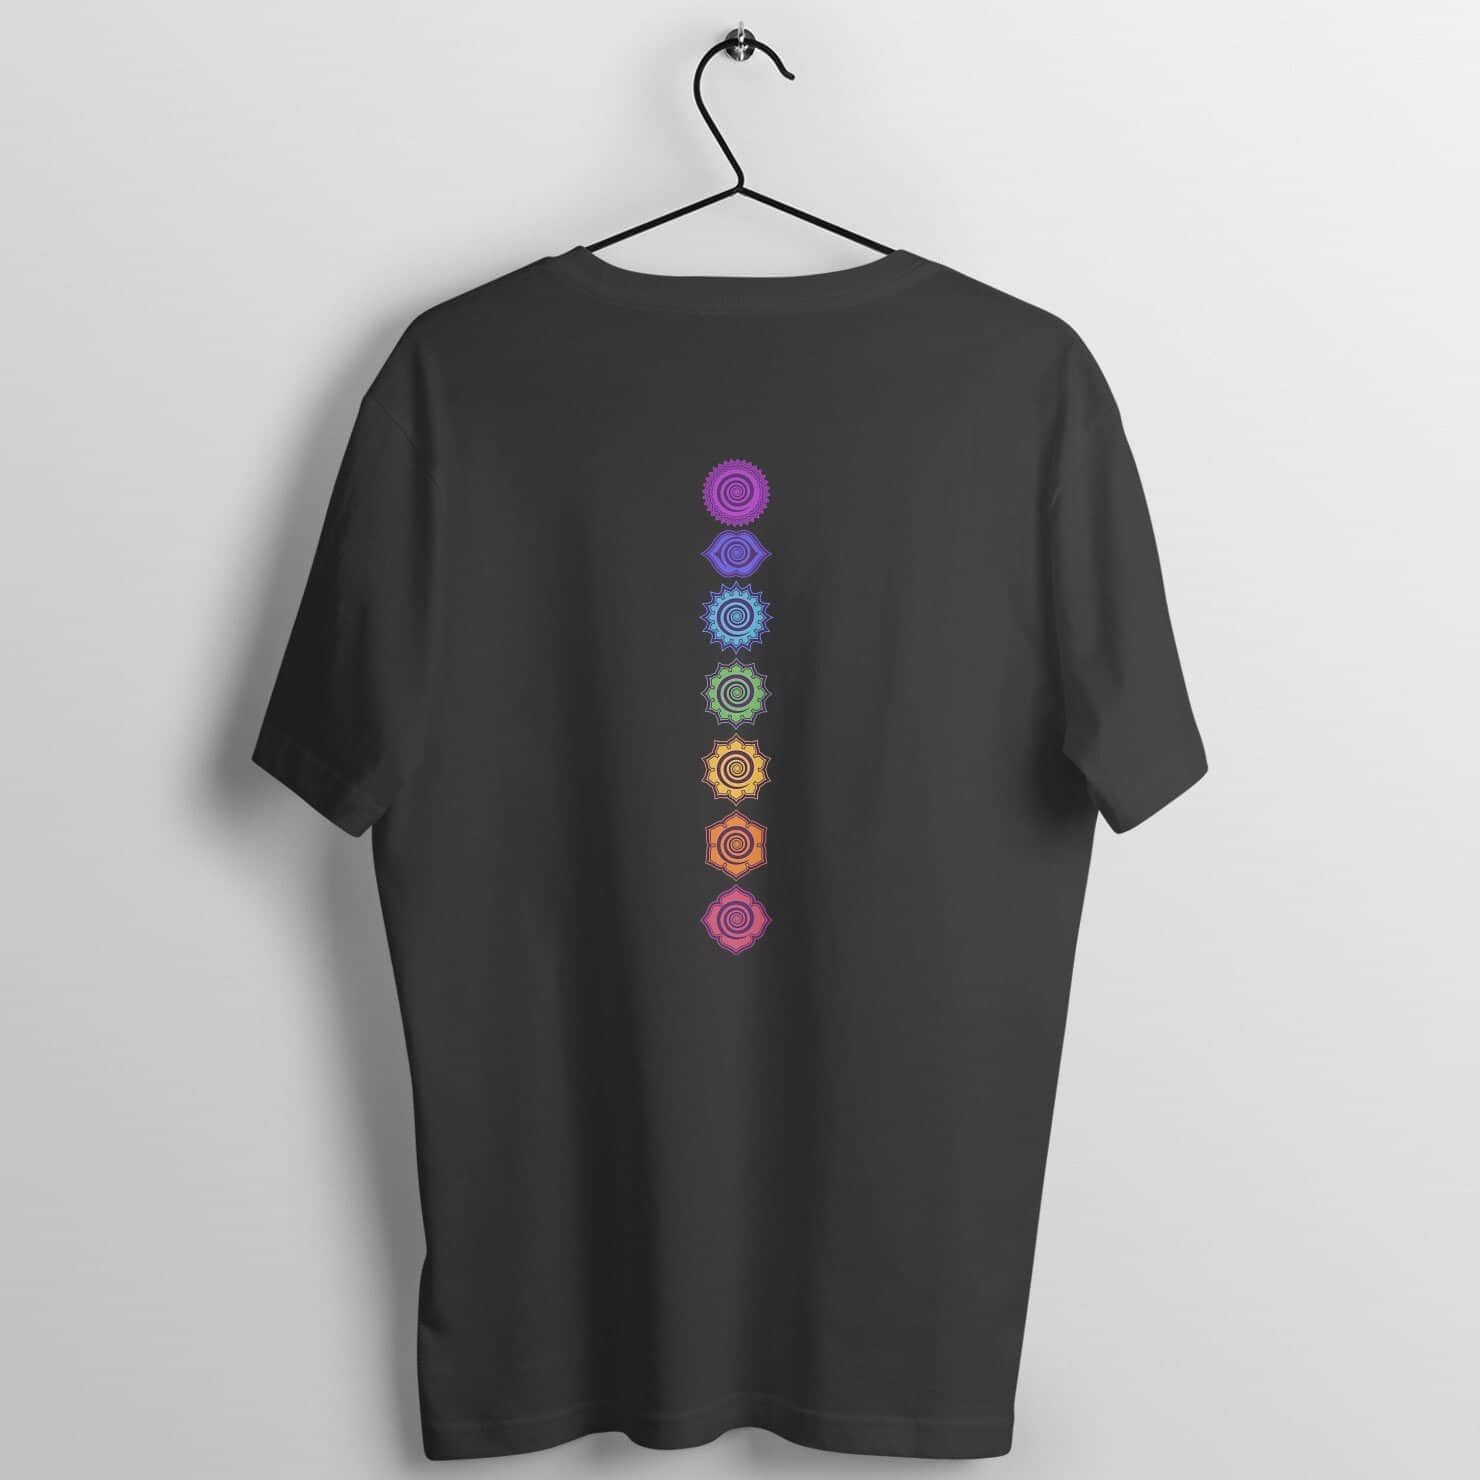 The 7 Chakras Special Back Printed Yoga T Shirt for Men and Women freeshipping - Catch My Drift India